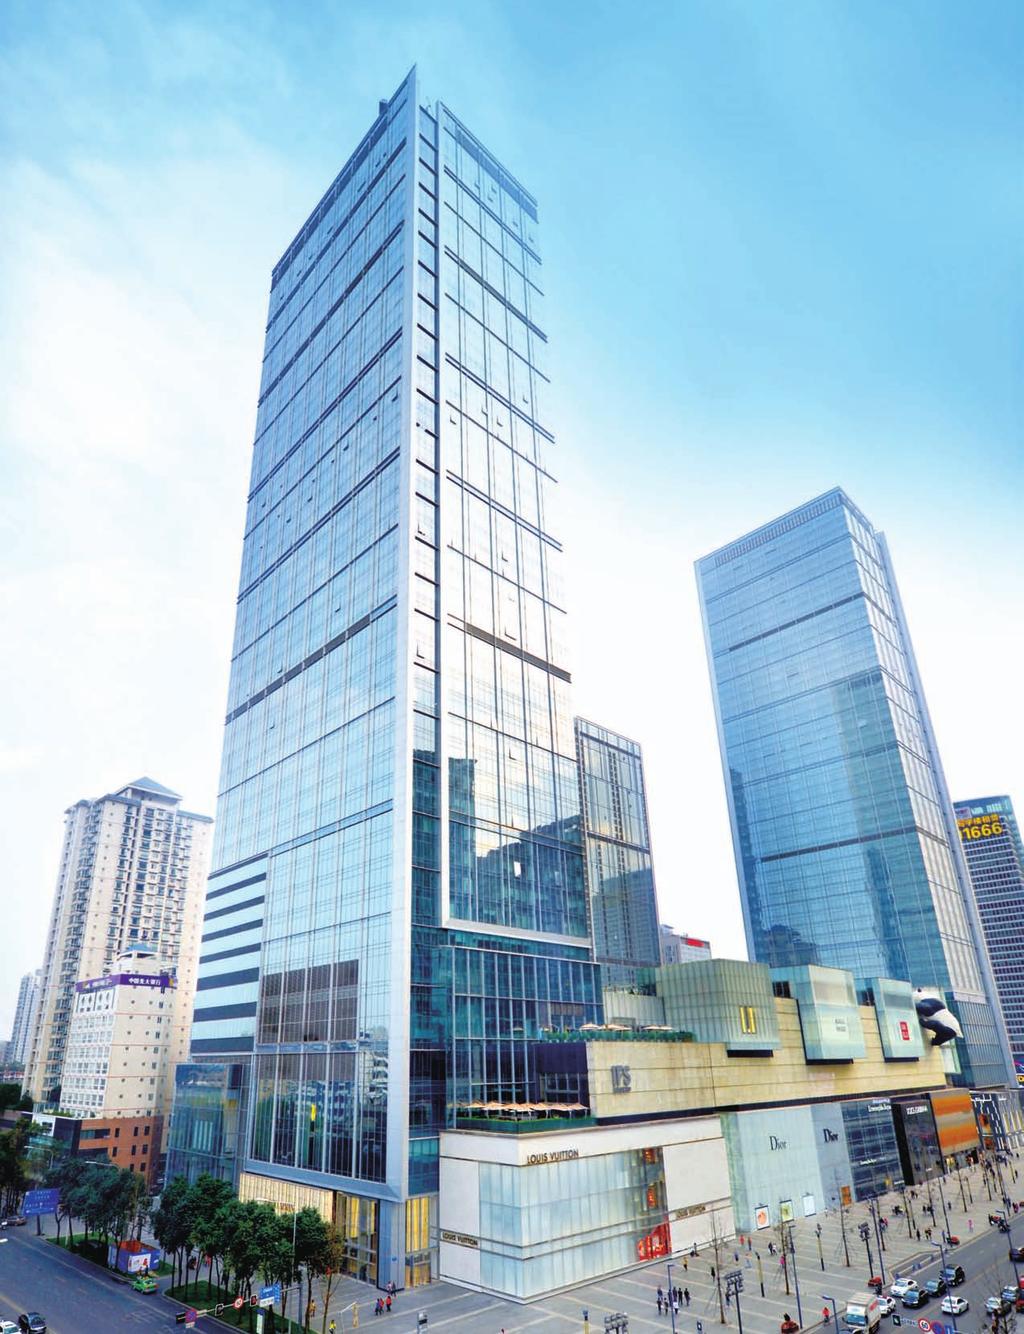 CHINA INVESTMENT PROPERTIES BUSINESS REVIEW With the adverse impact of currency movements, revenue increased by 2% to HK$2,350 million and operating profit by 1% to HK$1,253 million on translation to